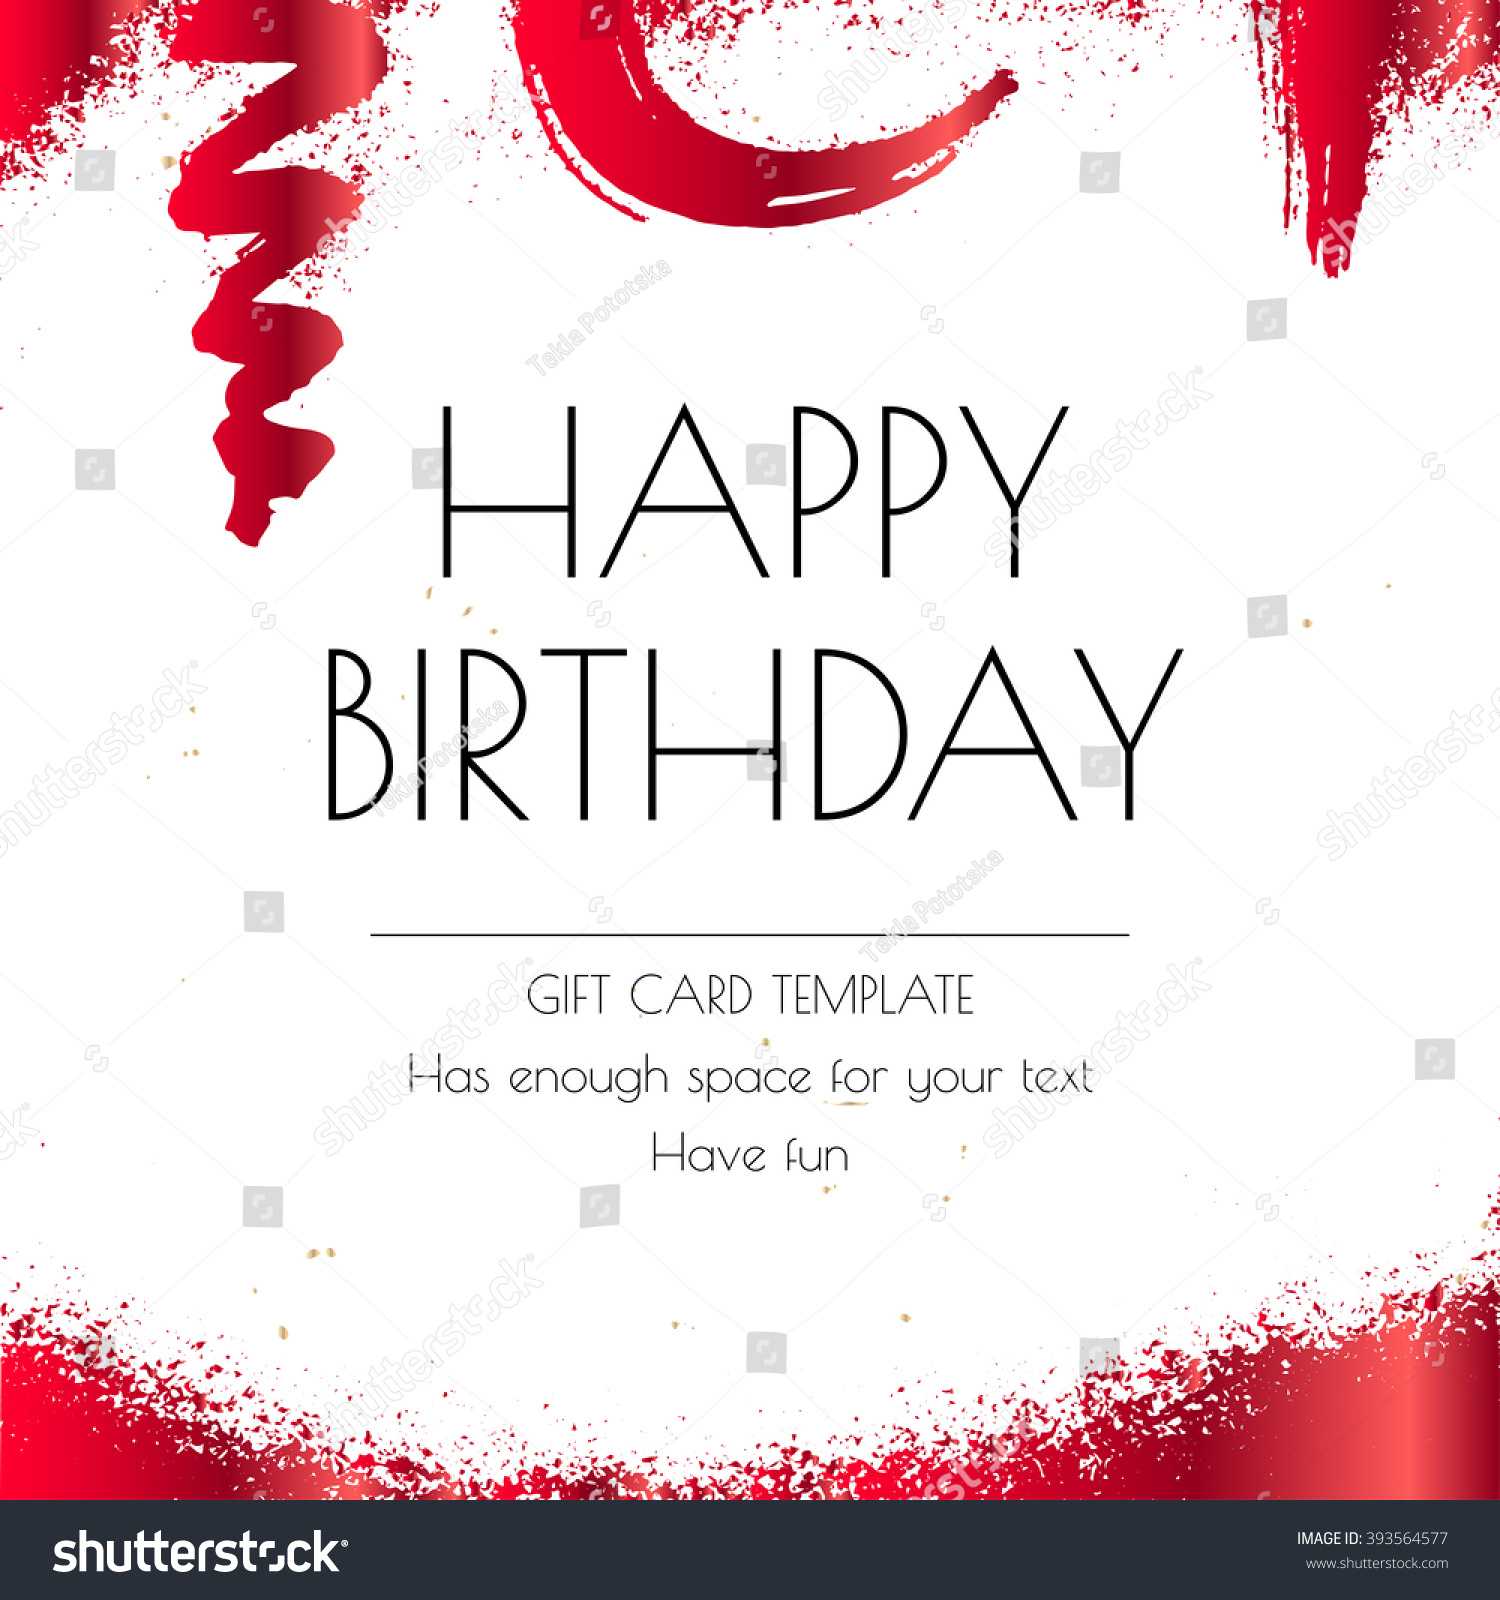 Thank You Card Indesign Template ] – Weekly Calendar Inside Birthday Card Template Indesign